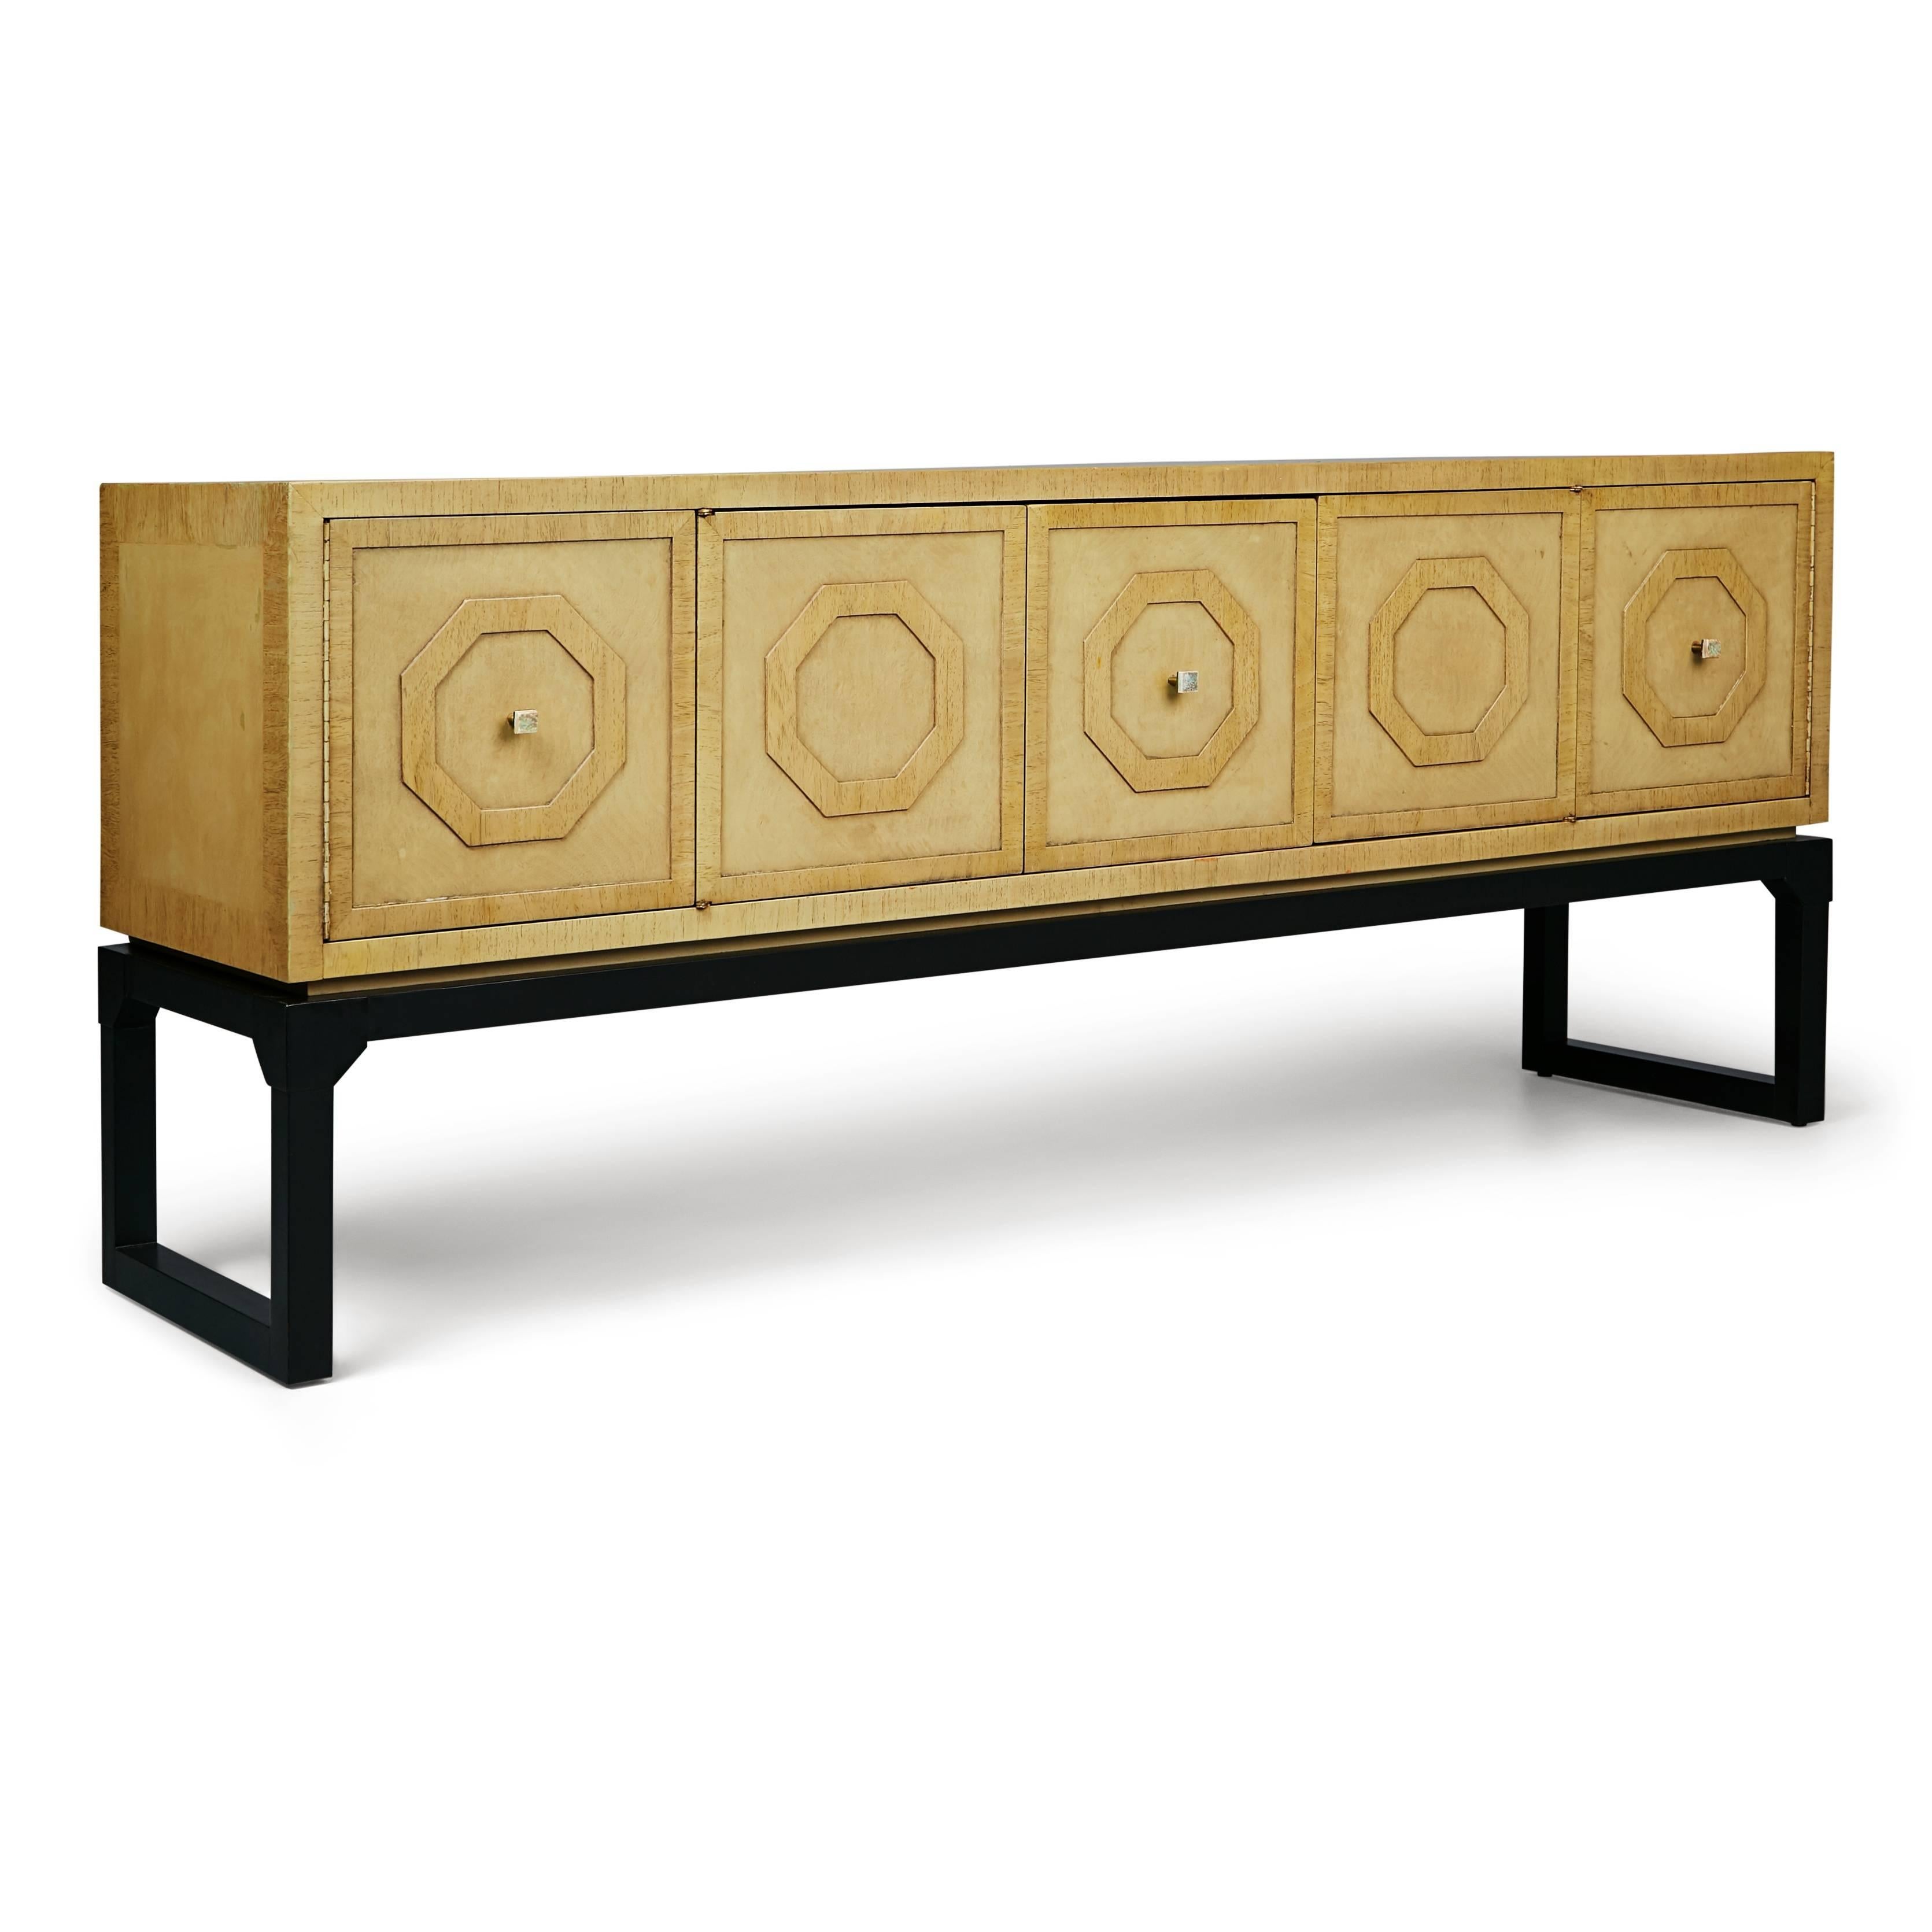 Elegant crafted credenza or sideboard by Romweber. This beautiful piece is fabricated from lacquered walnut which has been finished in a neutral bisque color and displays five panels on the front each decorated with a raised hexagon. Positioned in